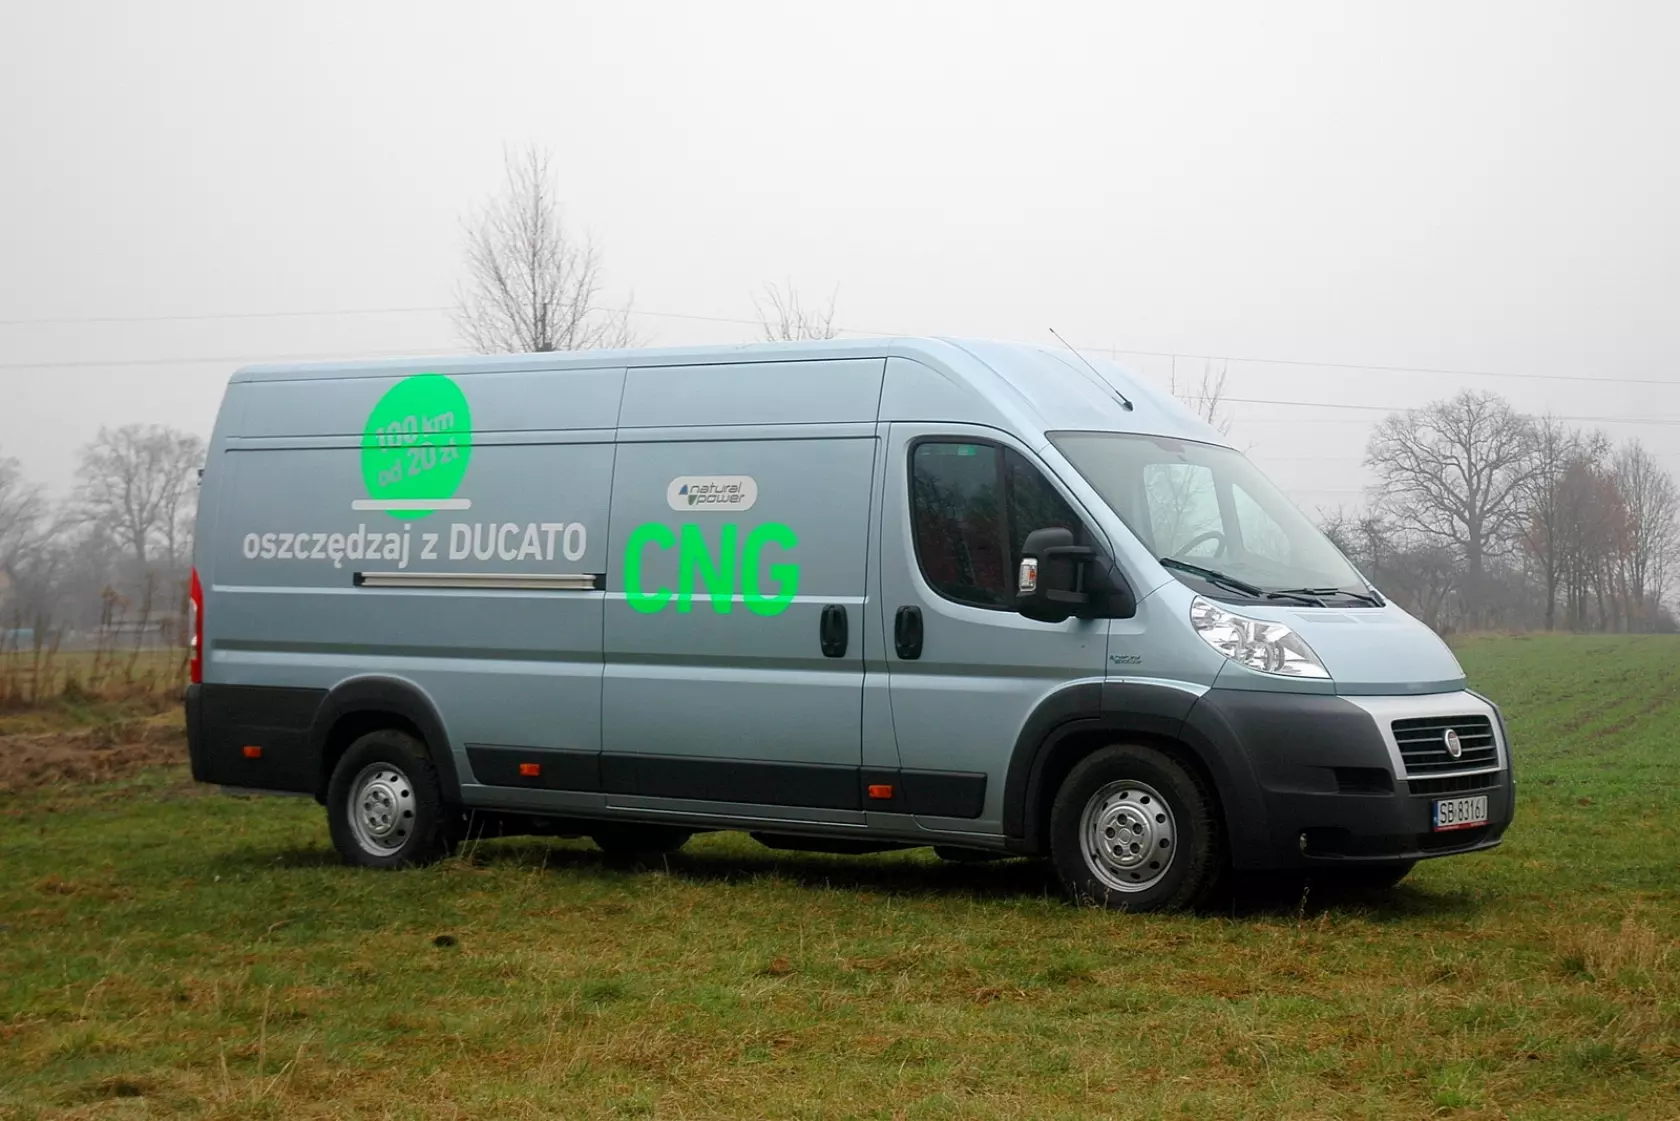 Fiat Ducato (2011 - 2014) used car review, Car review